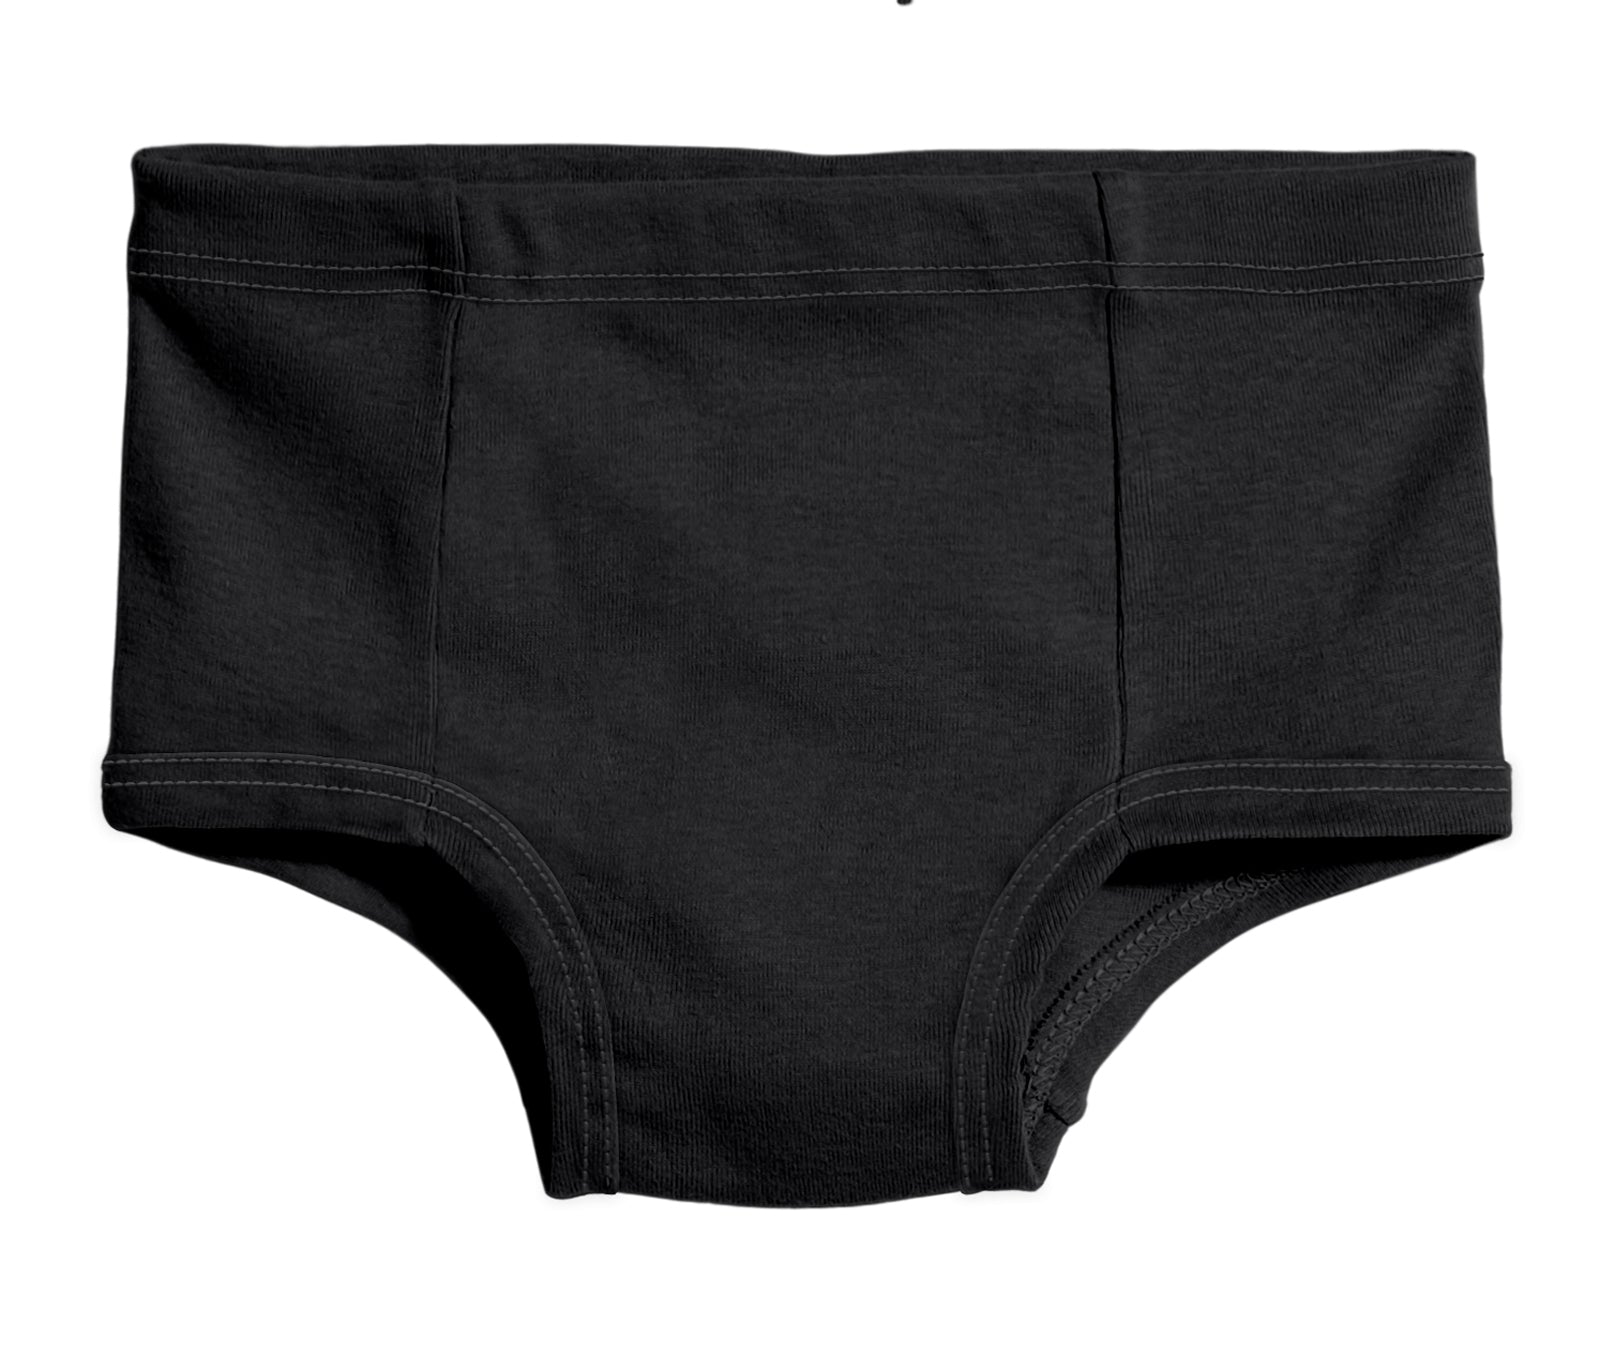 Boys and Girls Soft Cotton Simple Brief